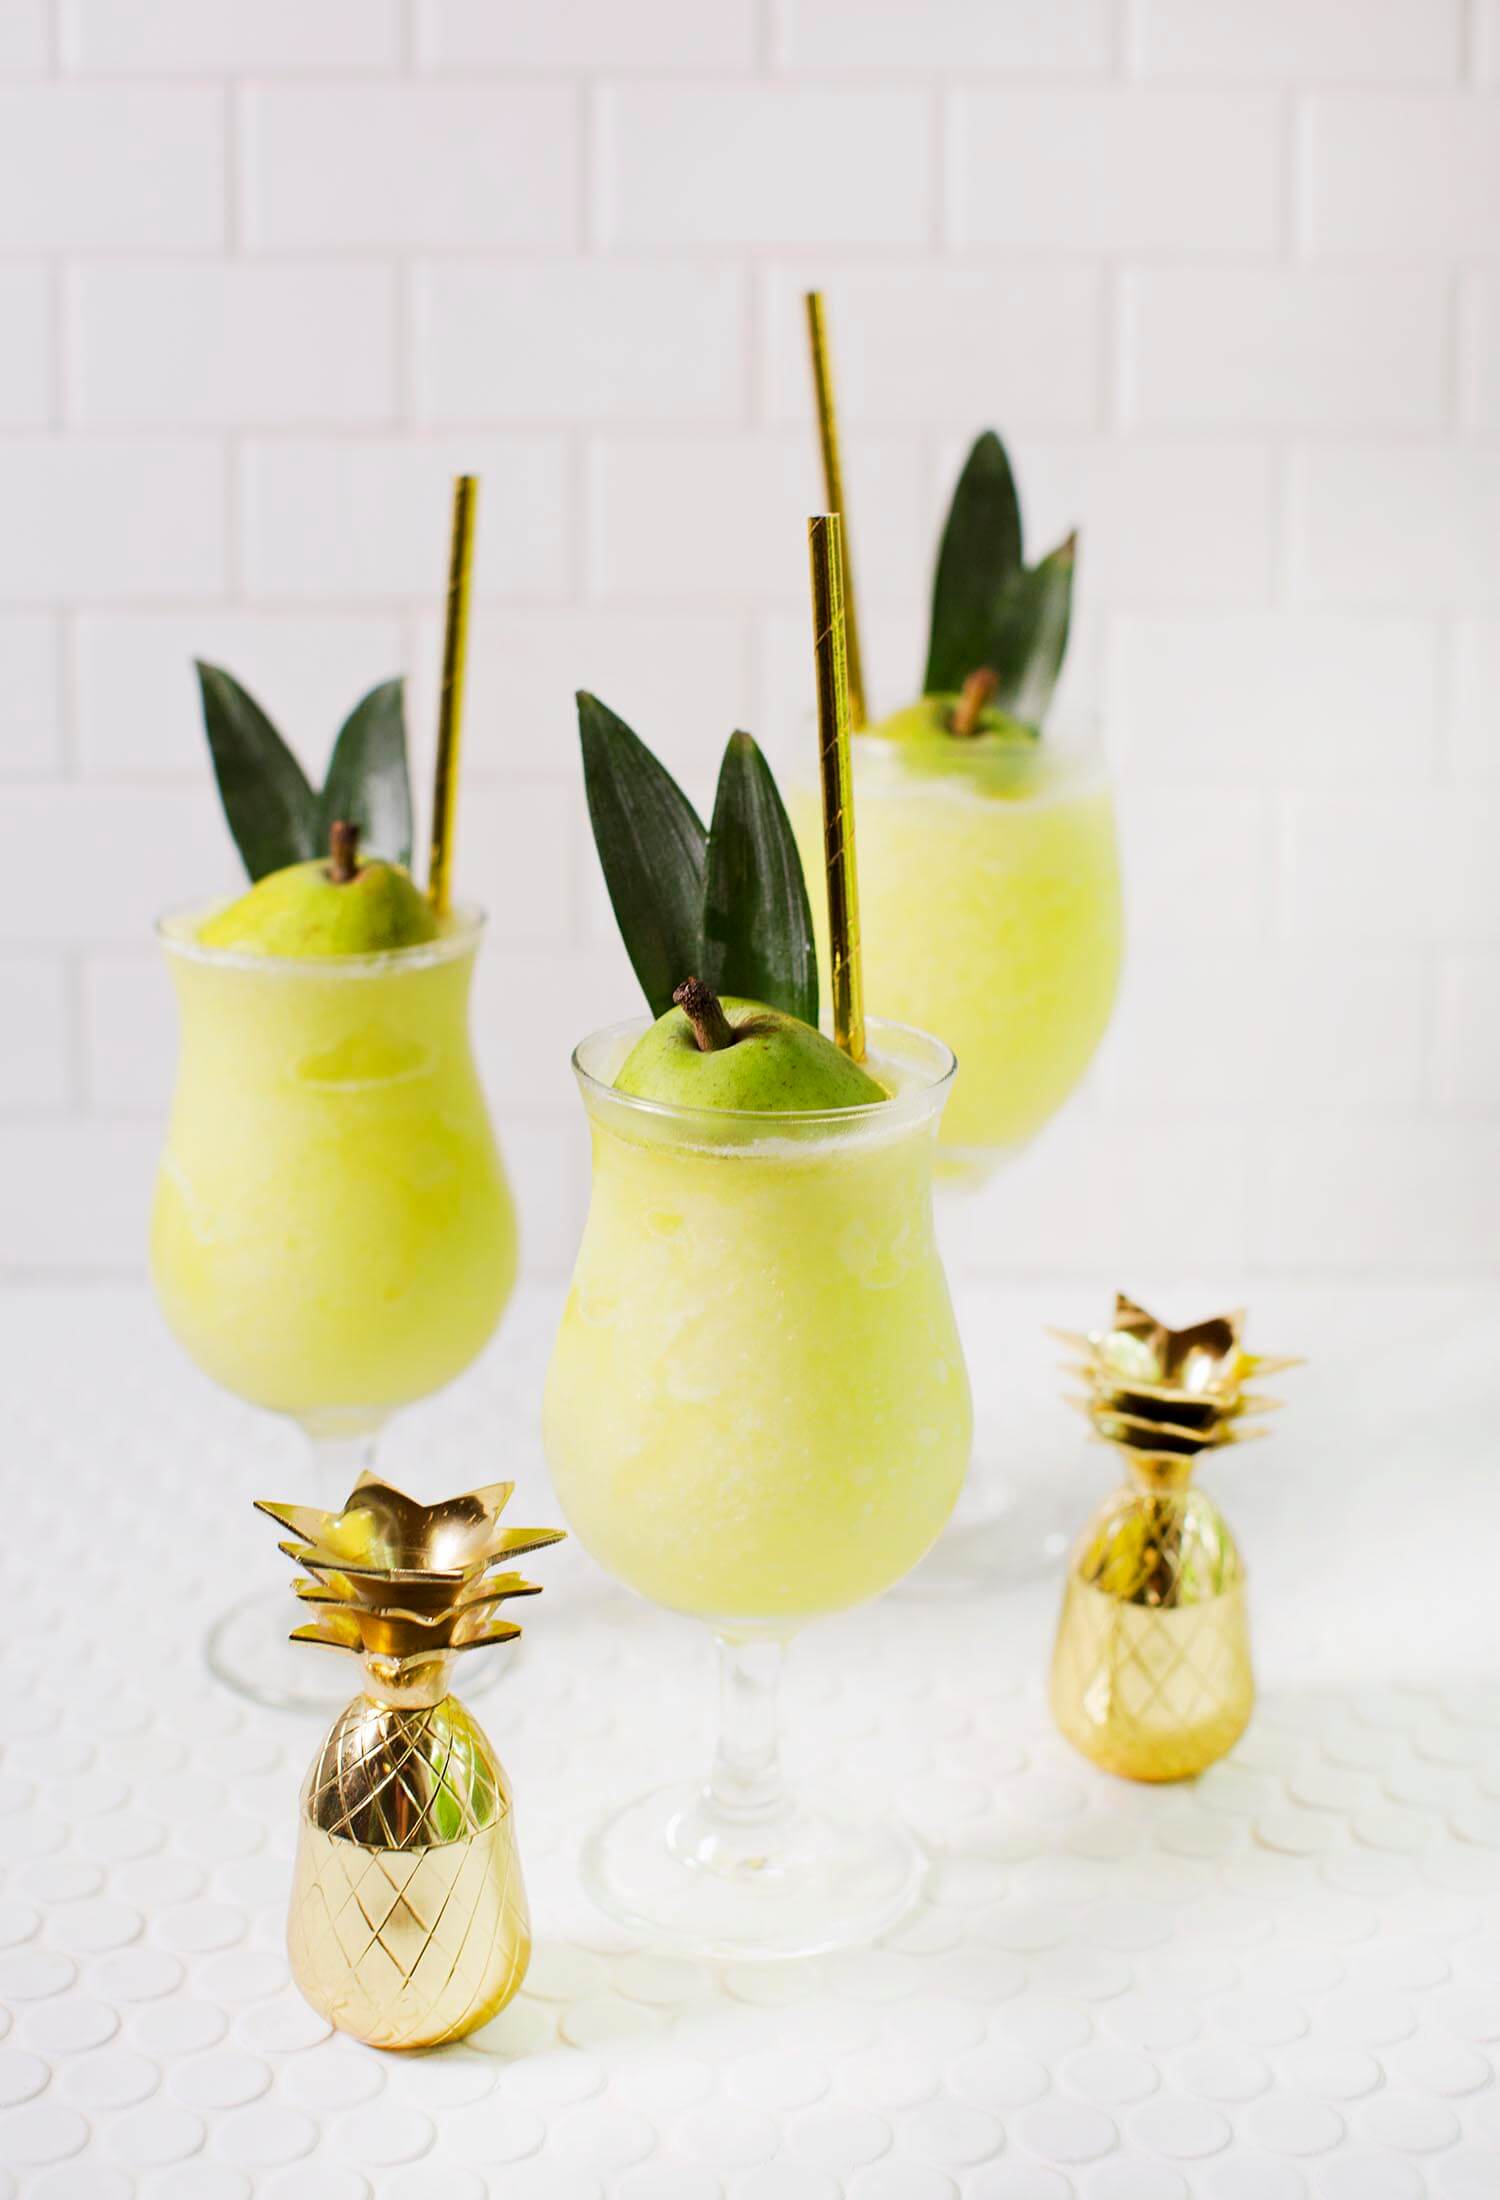 How to make tiki drinks at home